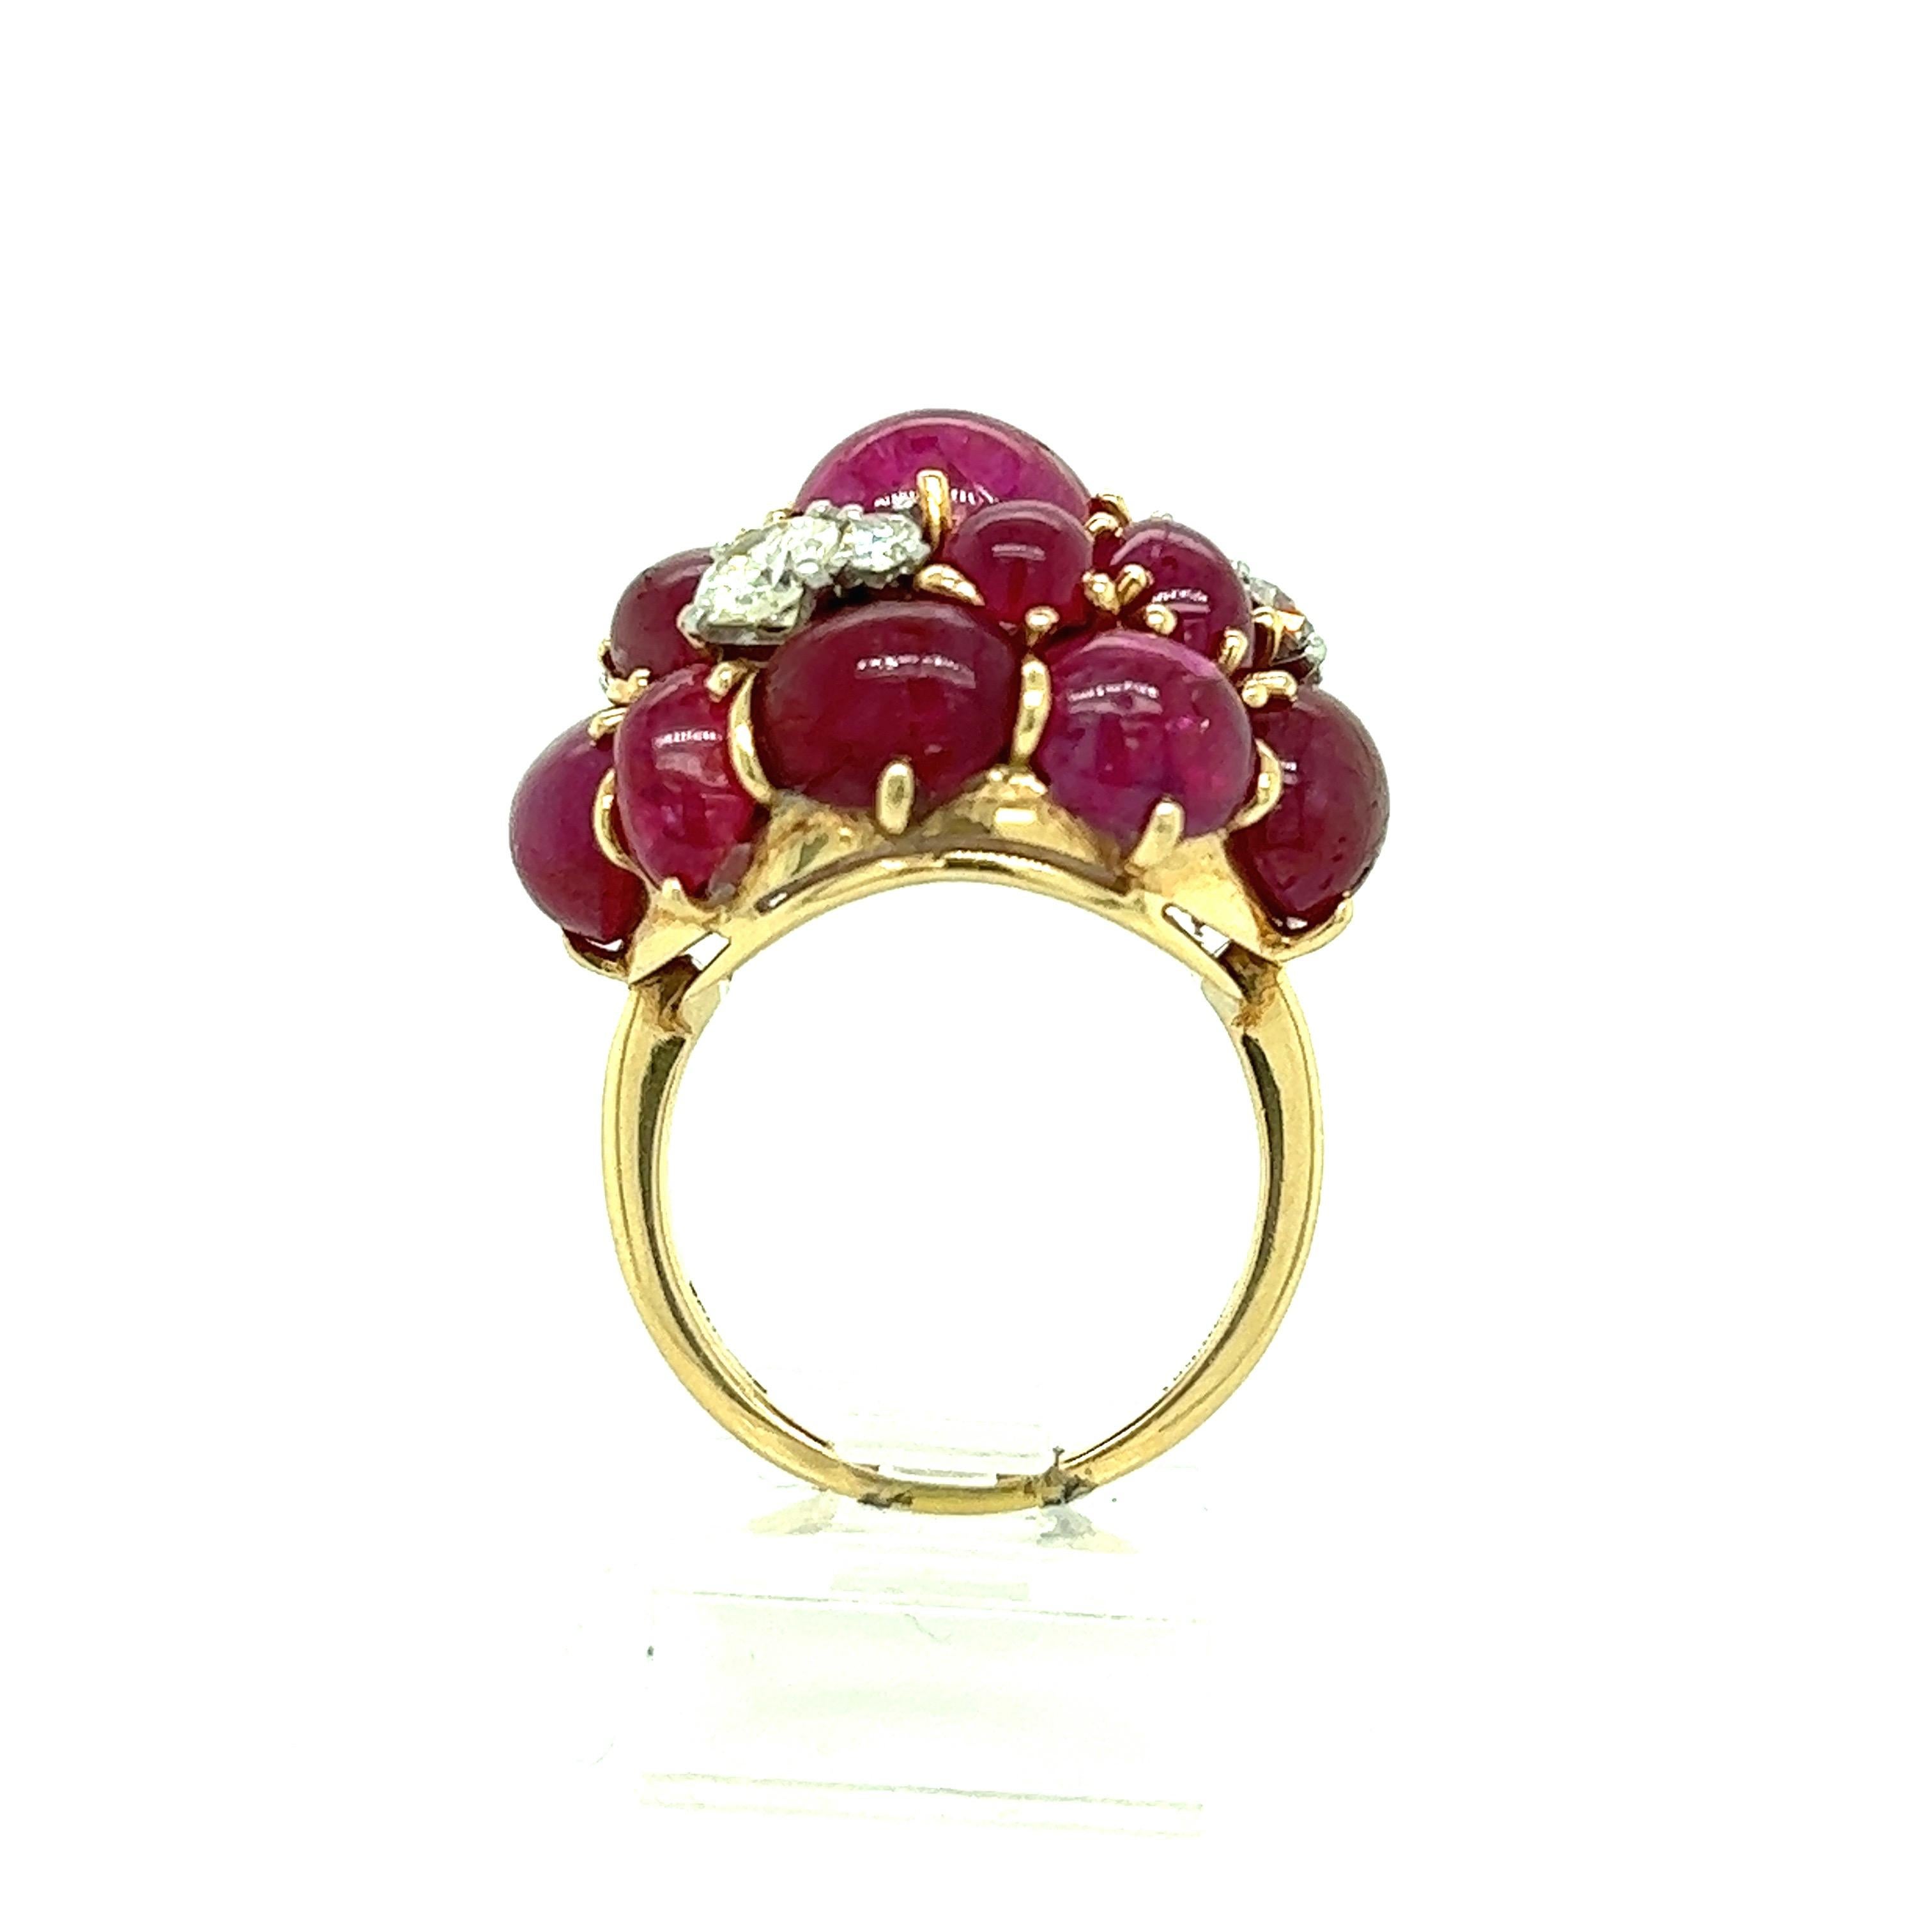 Seaman Schepps ring featuring approximately 25 carats of cabochon rubies from Burma and approximately 0.75 carat of diamonds. The stones are set on 18 karat yellow gold band. Marked 